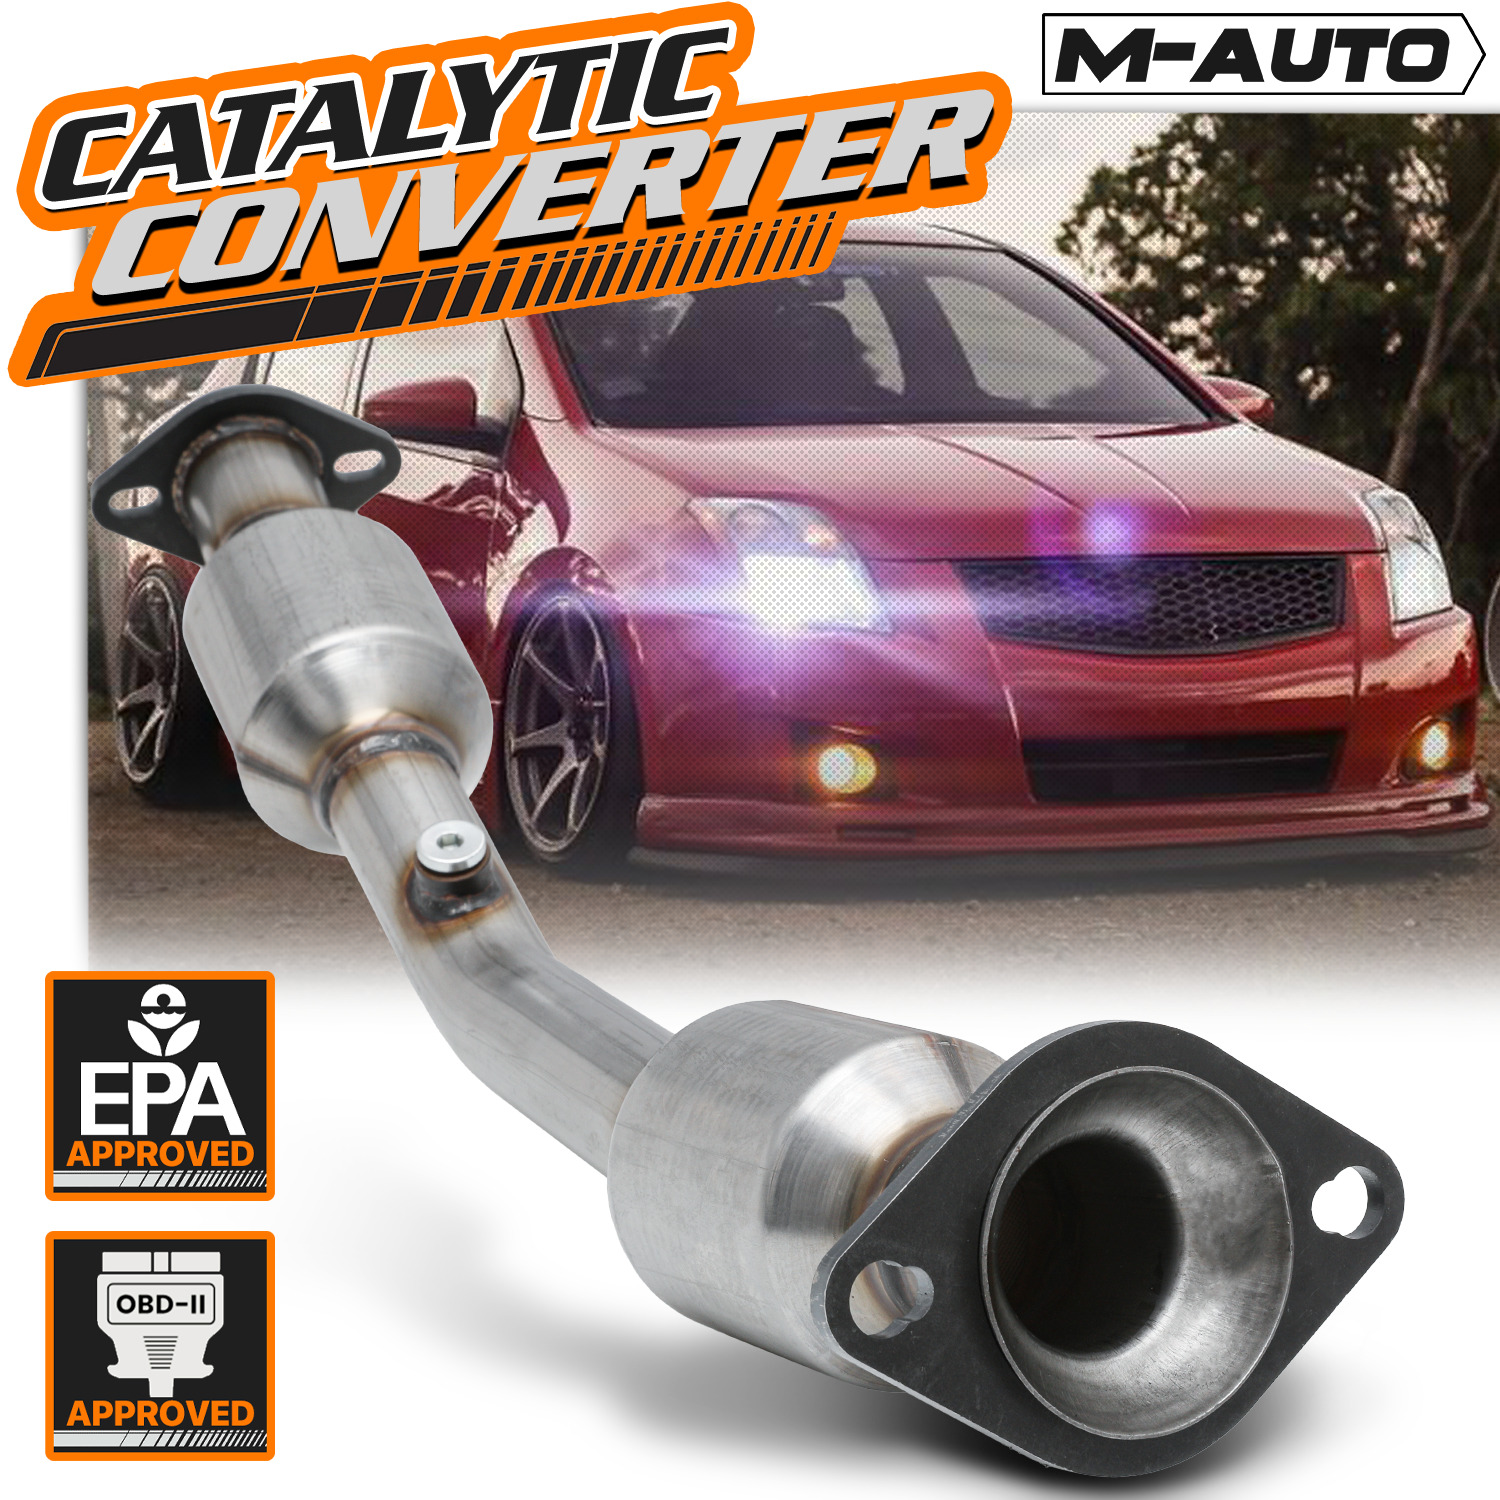 Stainless Steel Catalytic Converter Exhaust Down Pipe For 2007-2012 Sentra 2.0L